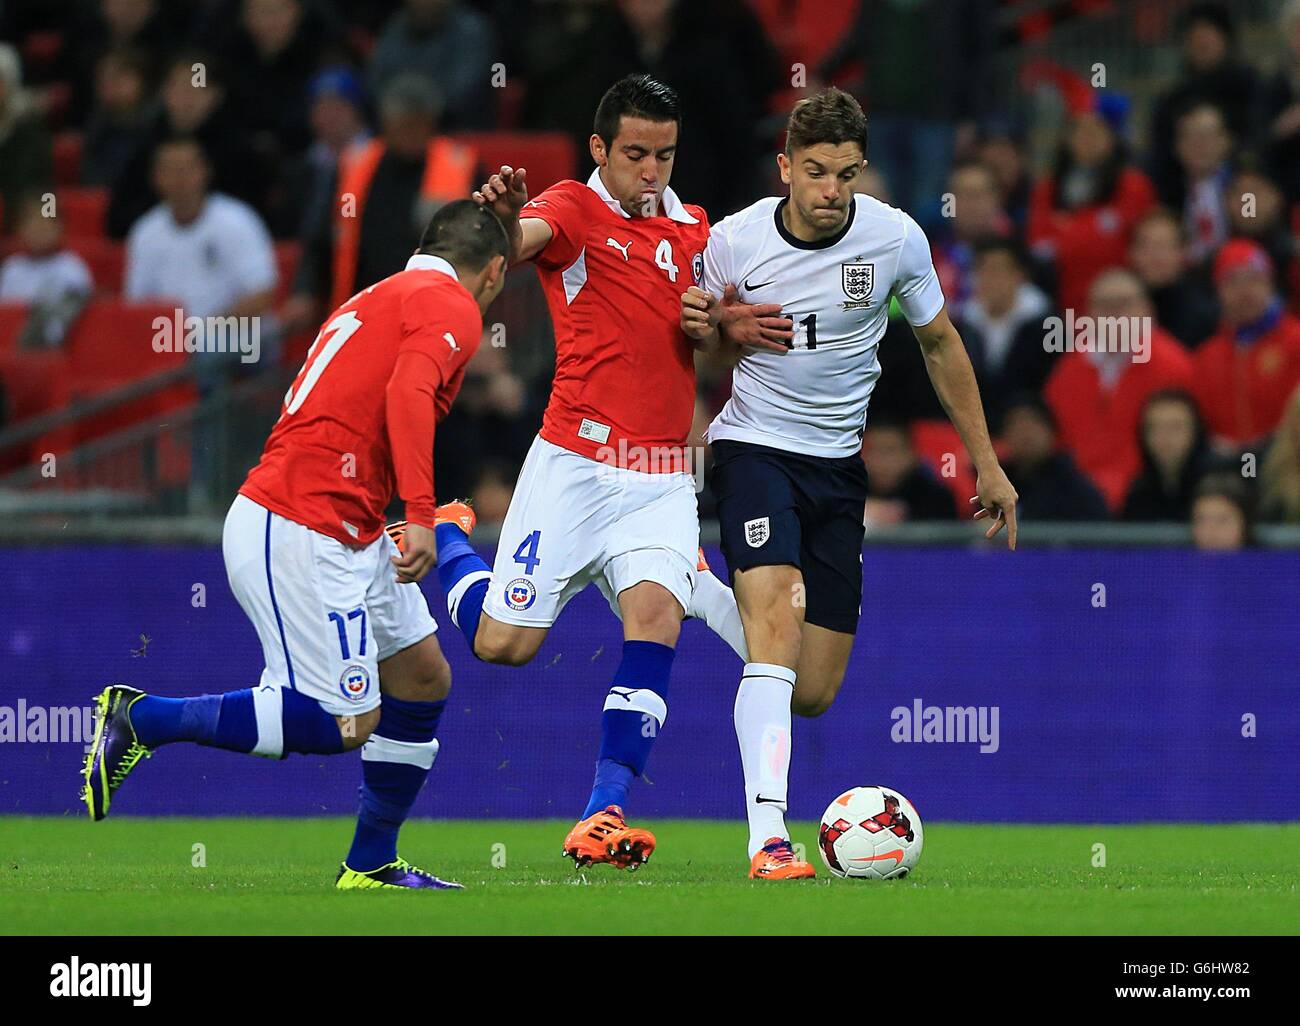 Soccer - International Friendly - England v Chile - Wembley Stadium. England's Jay Rodriguez (right) and Chile's Mauricio Isla battle for the ball Stock Photo